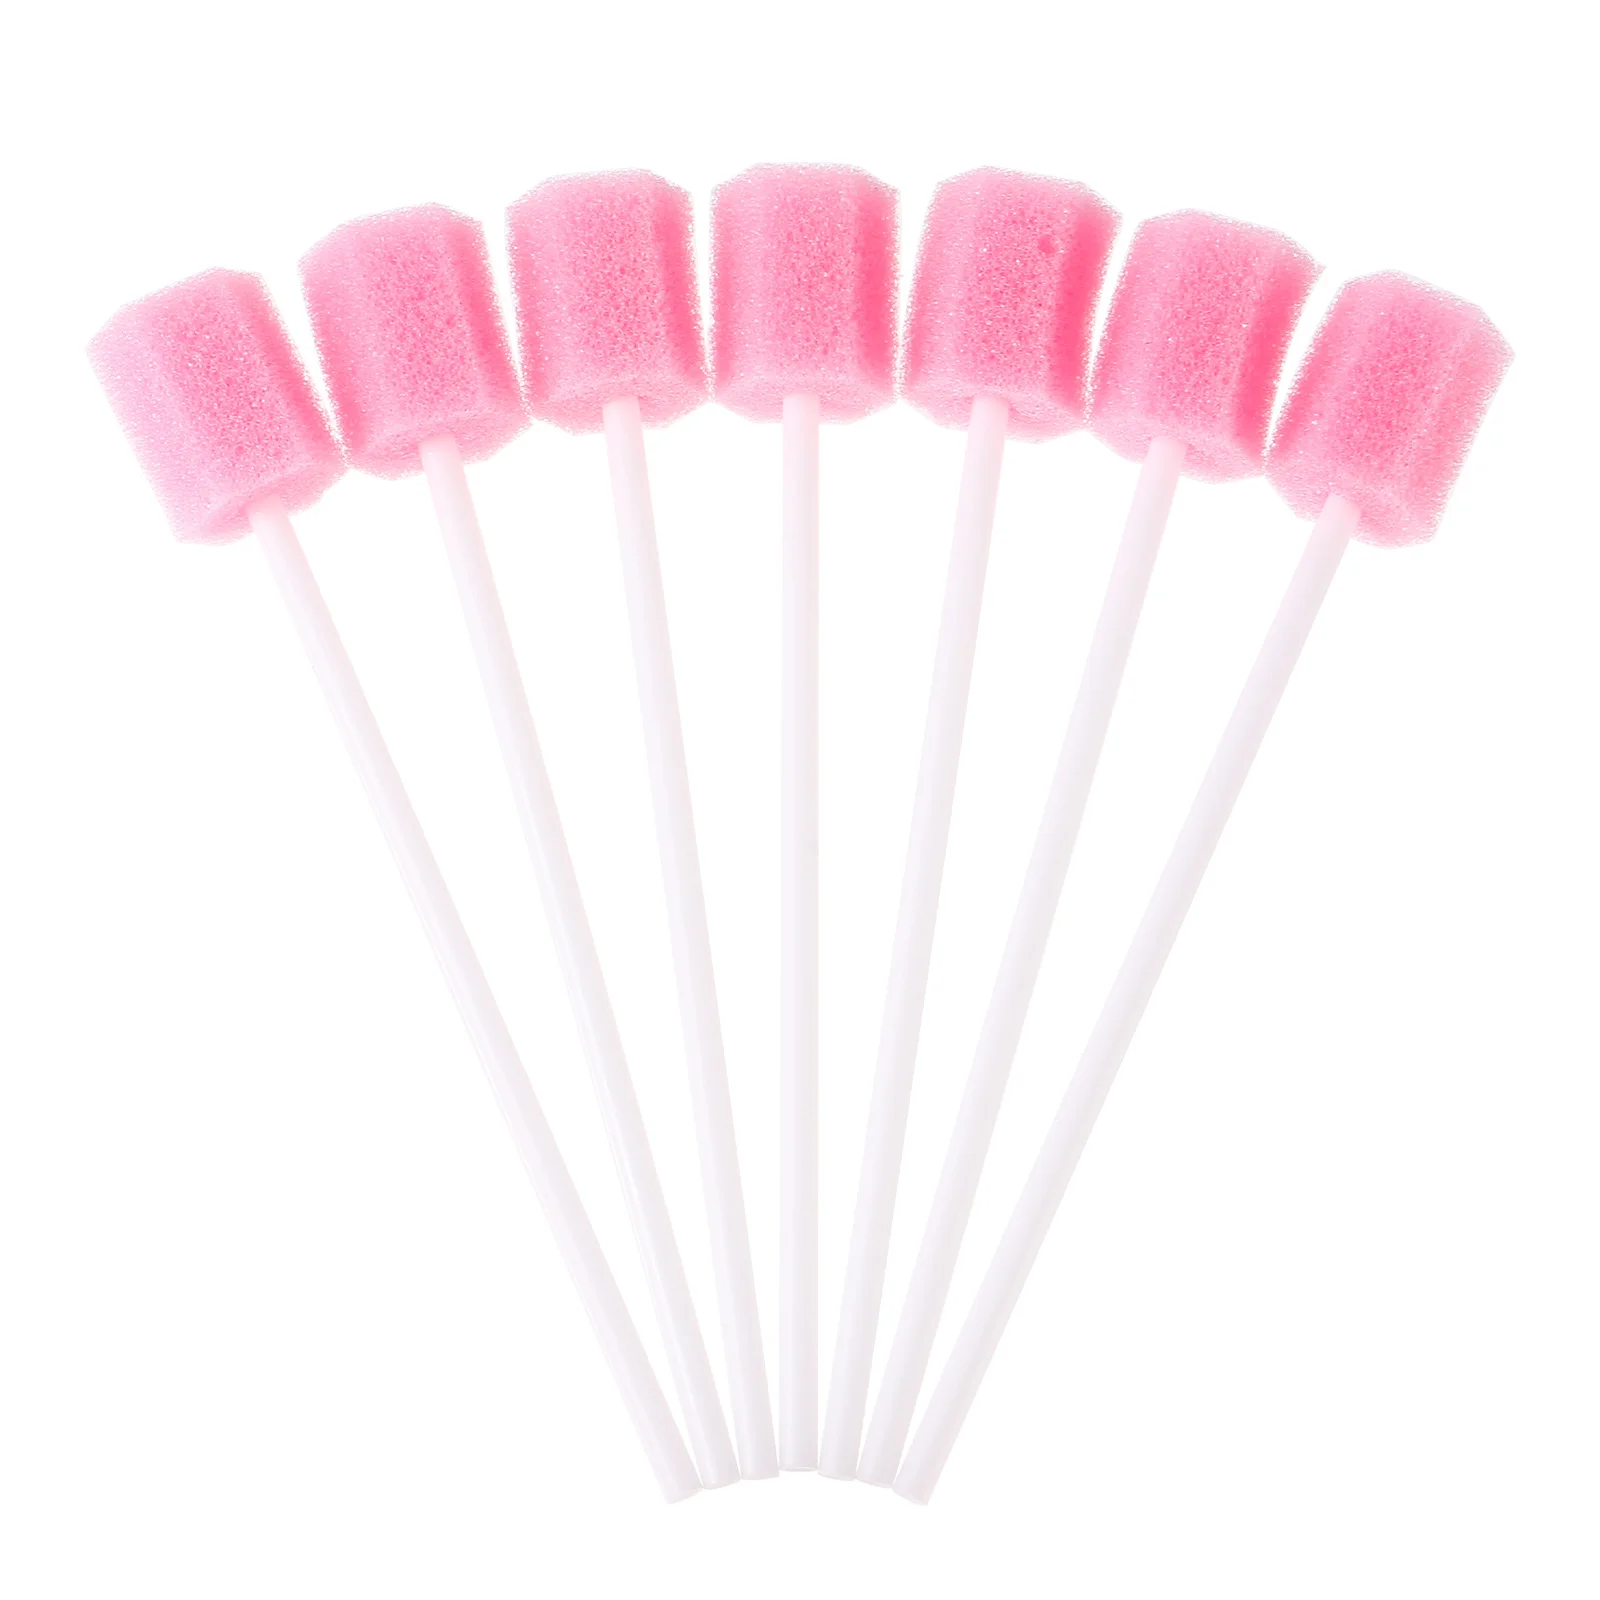 

Healifty 100pcs Disposable Oral Care Sponge Swabs Tooth Cleaning Mouth Swabs Practical Mouth Care Swabs